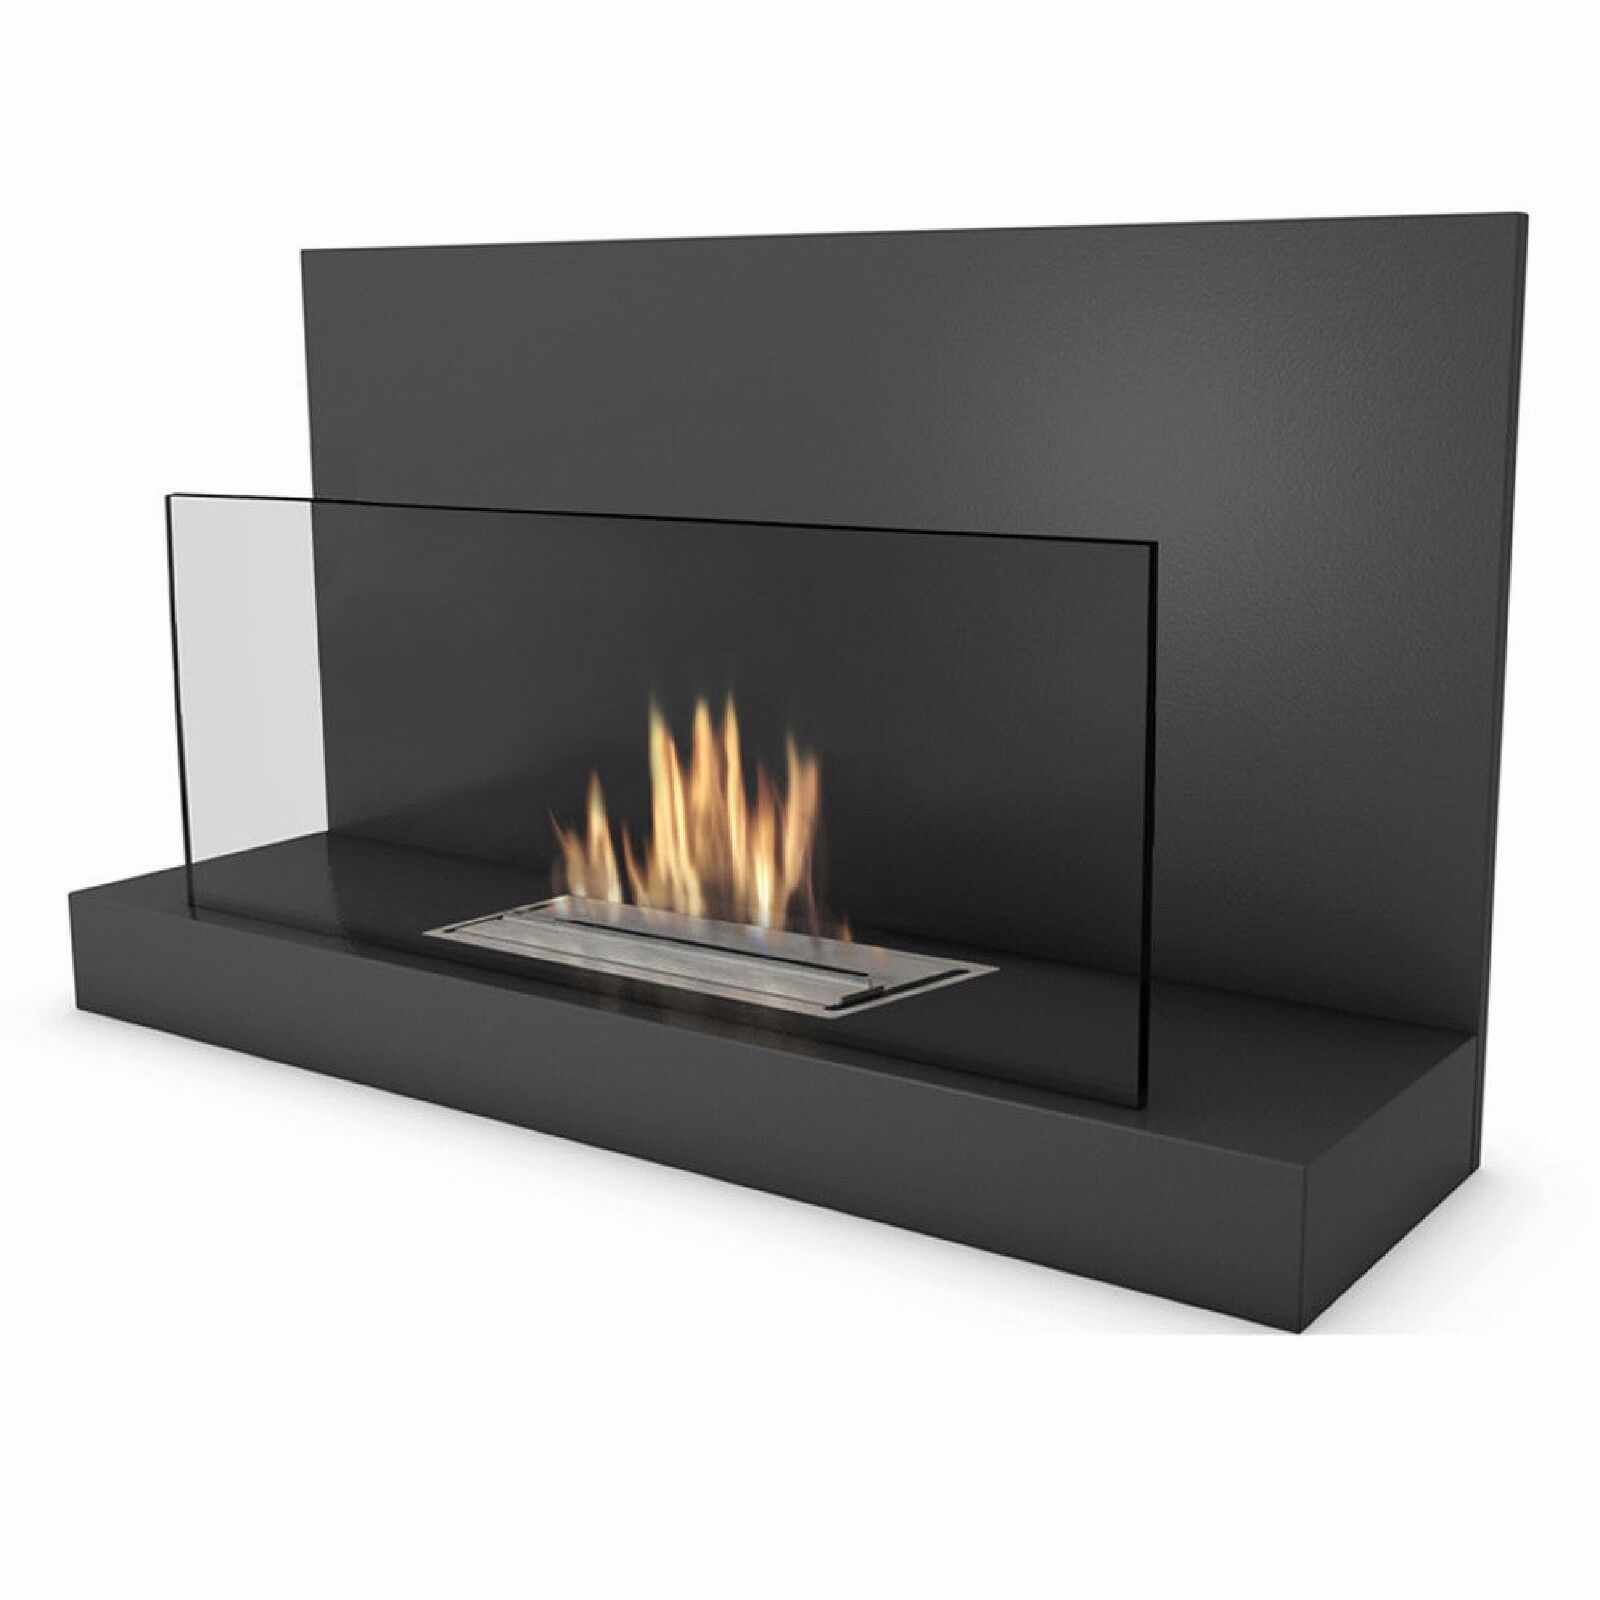 Bio Ethanol Fireplace Fuel Awesome Imagin Fires Alden Bio Ethanol Real Flame Fireplace Includes Stones and Fuel